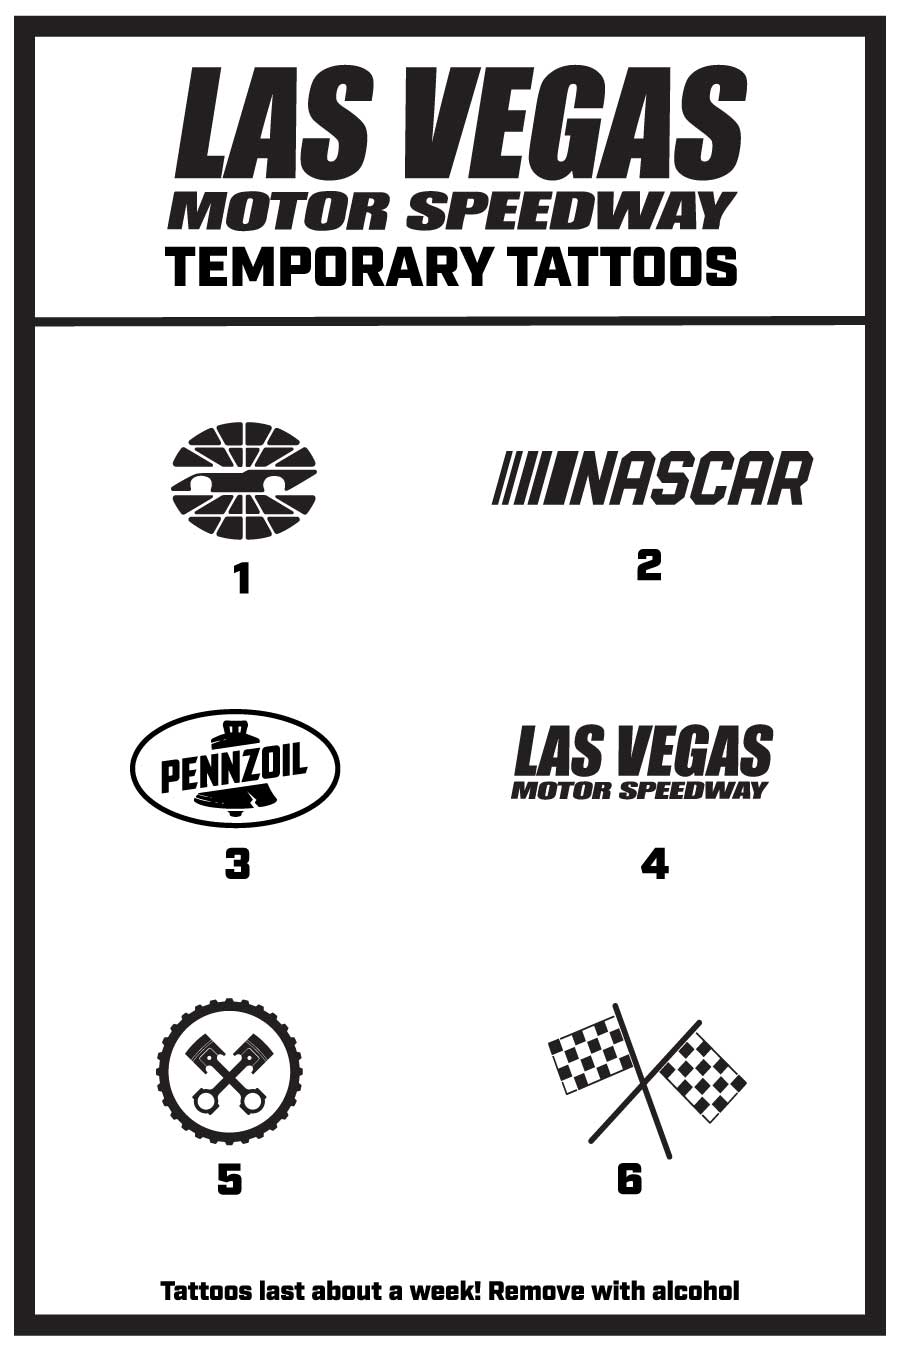 Faux Tattoo Studios Experiential Temporary Tattoo Events 549